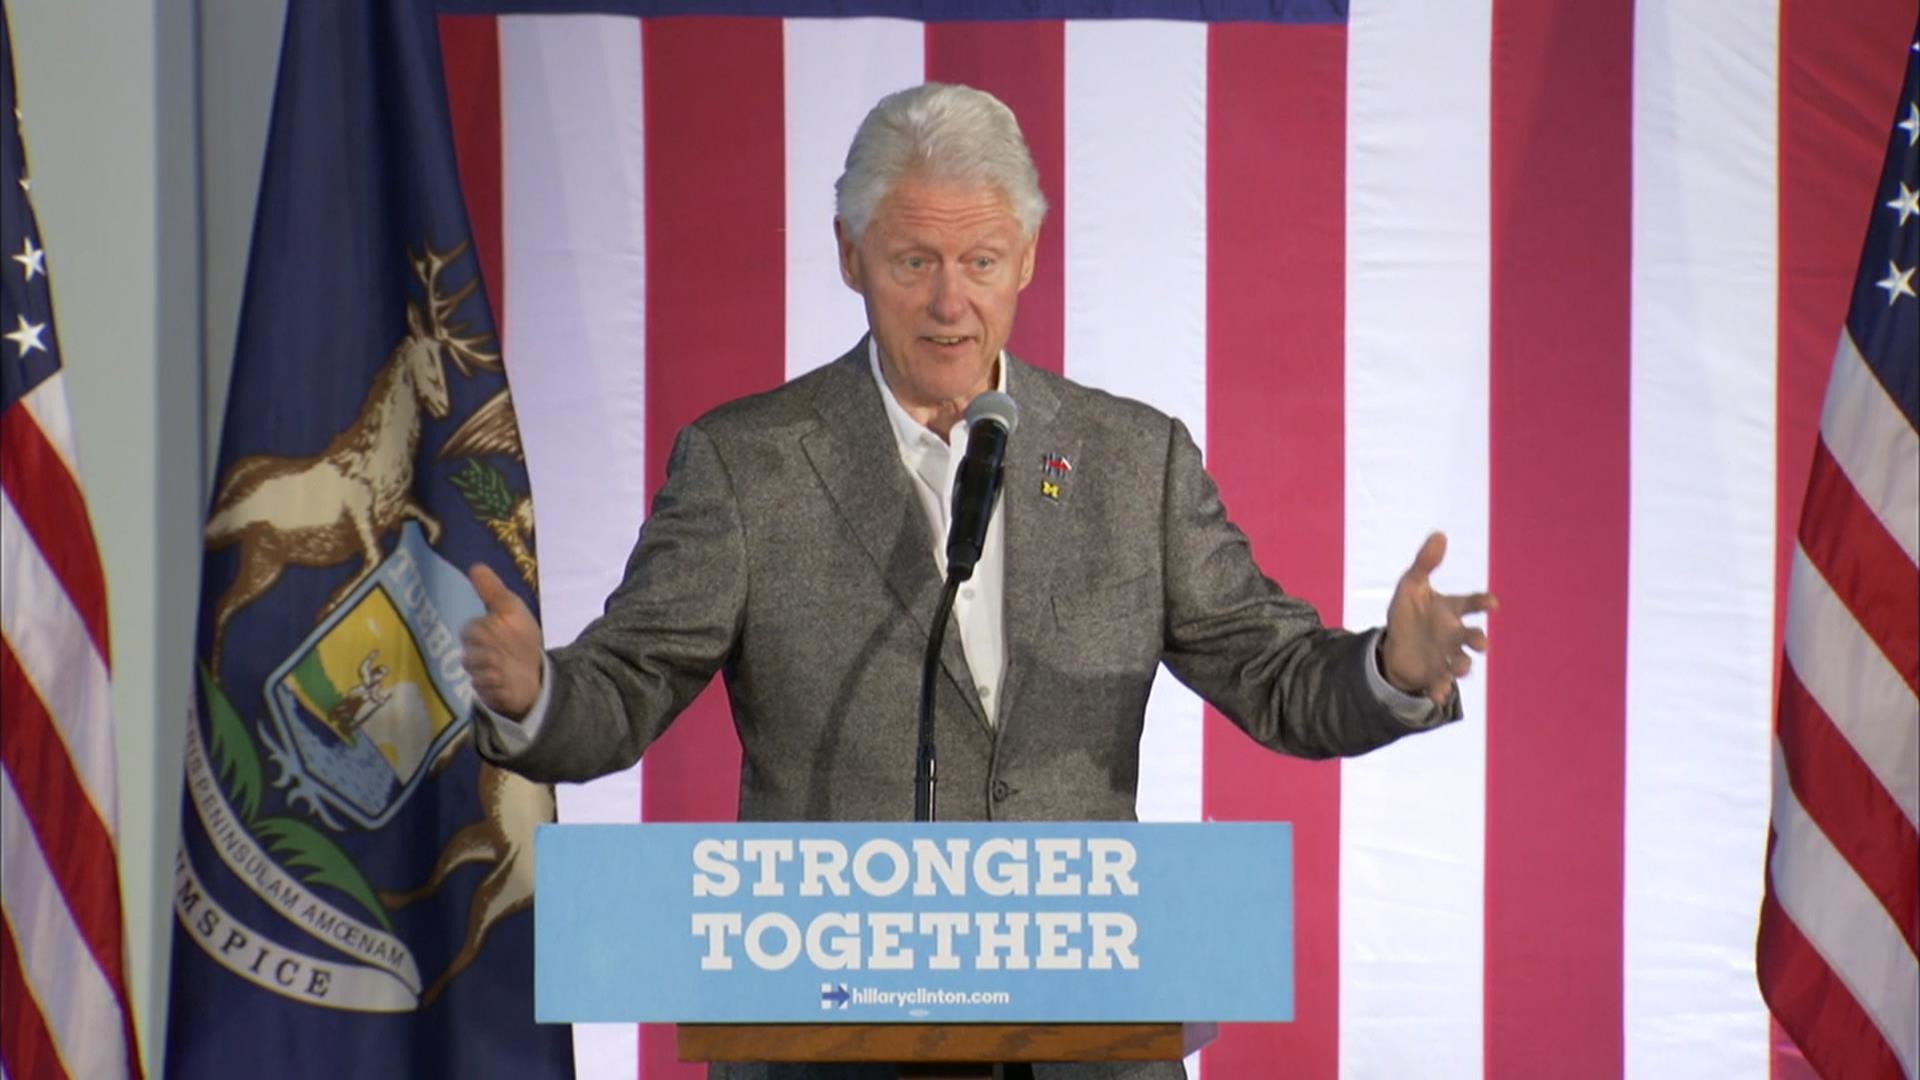 1920x1080 Bill Clinton Attempts to Clarify Scathing Obamacare Comments - NBC News